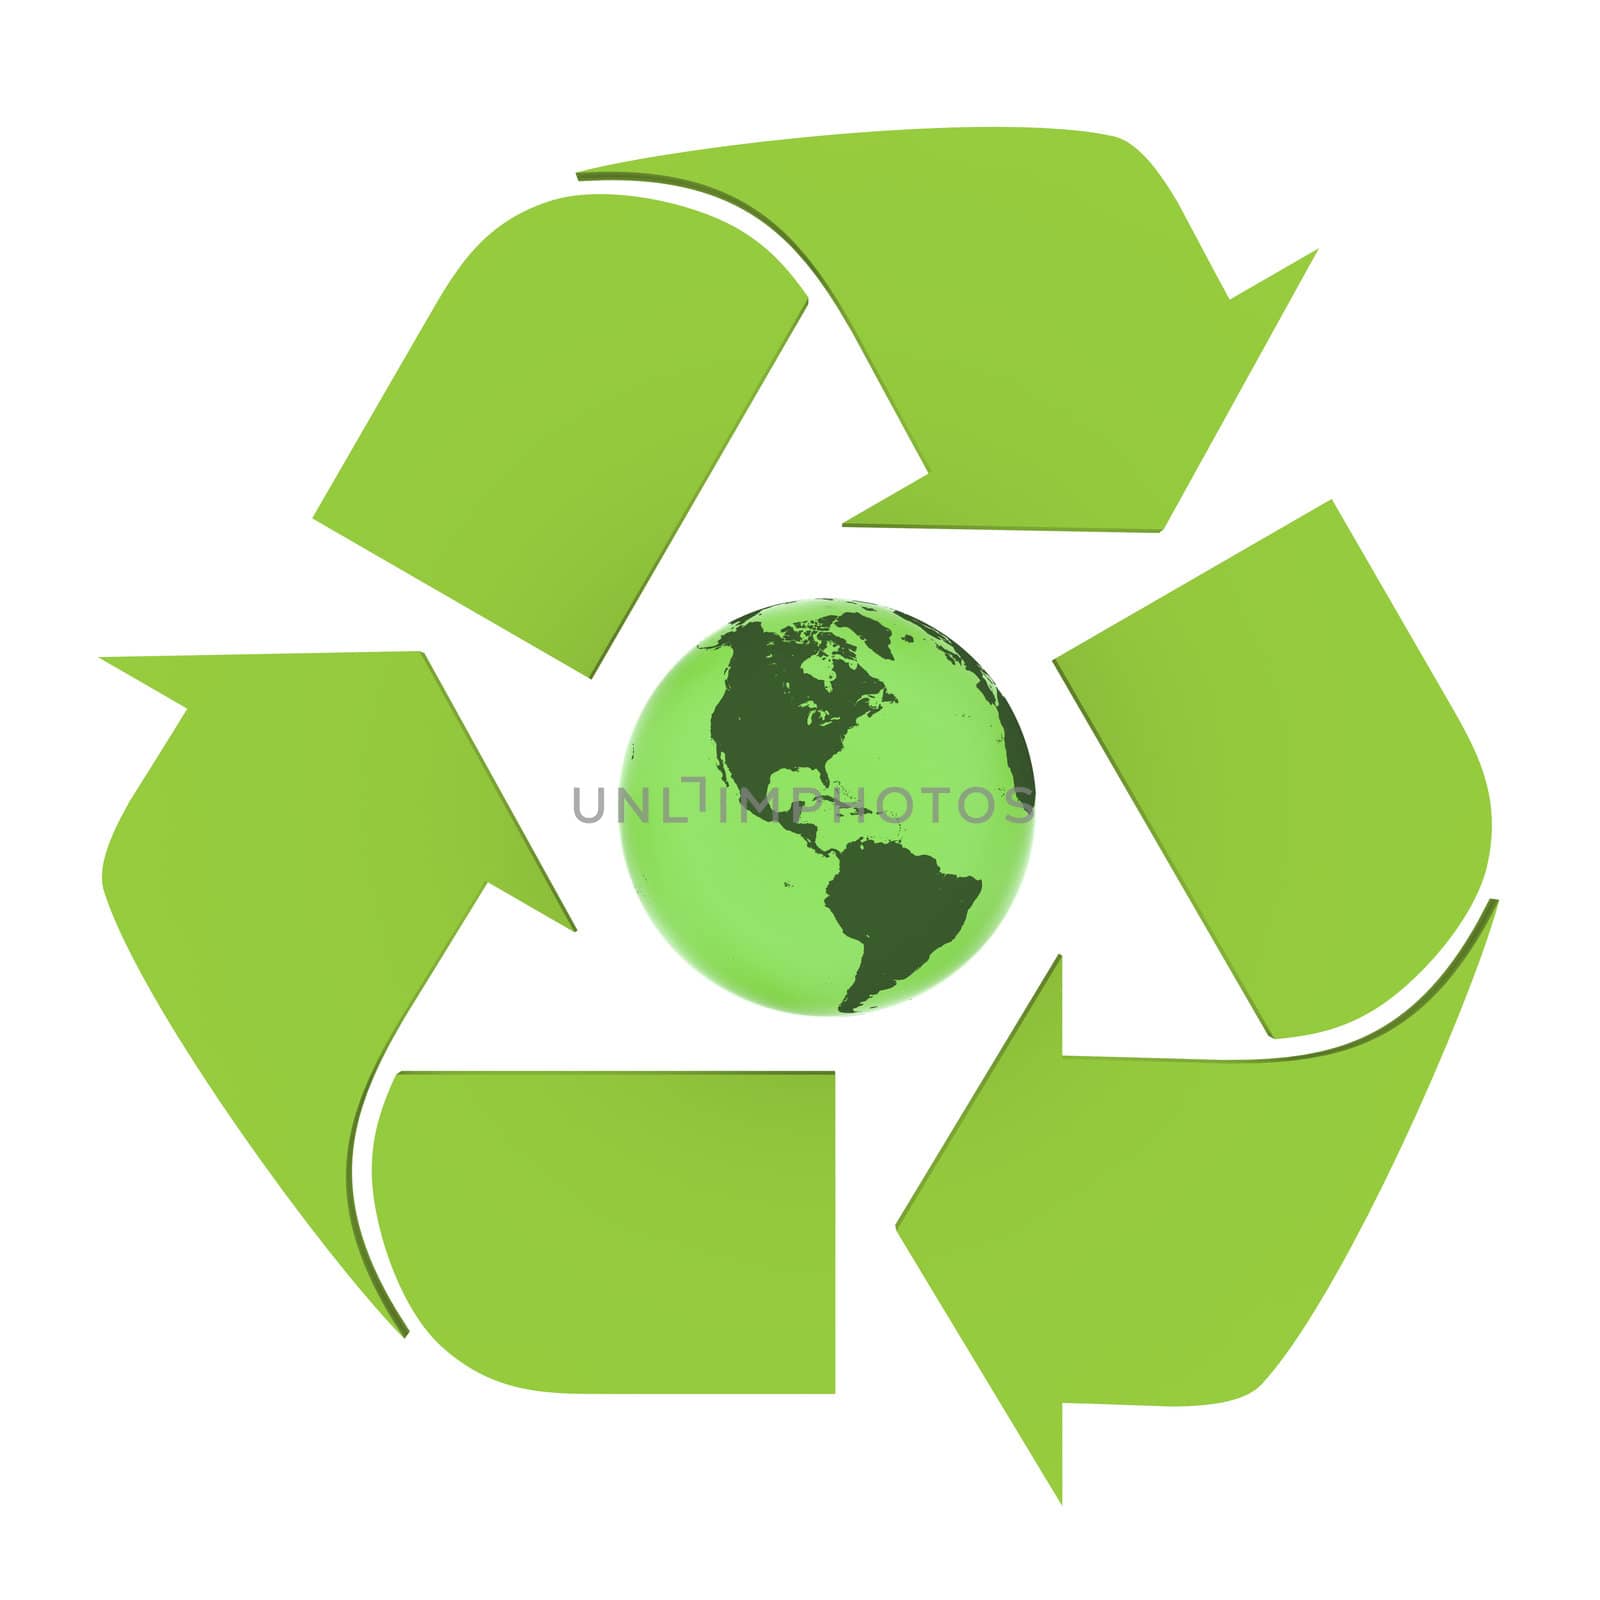 Green planet Earth inside recycling symbol, concept of environmental conservation, isolated on white background. Elements of this image furnished by NASA